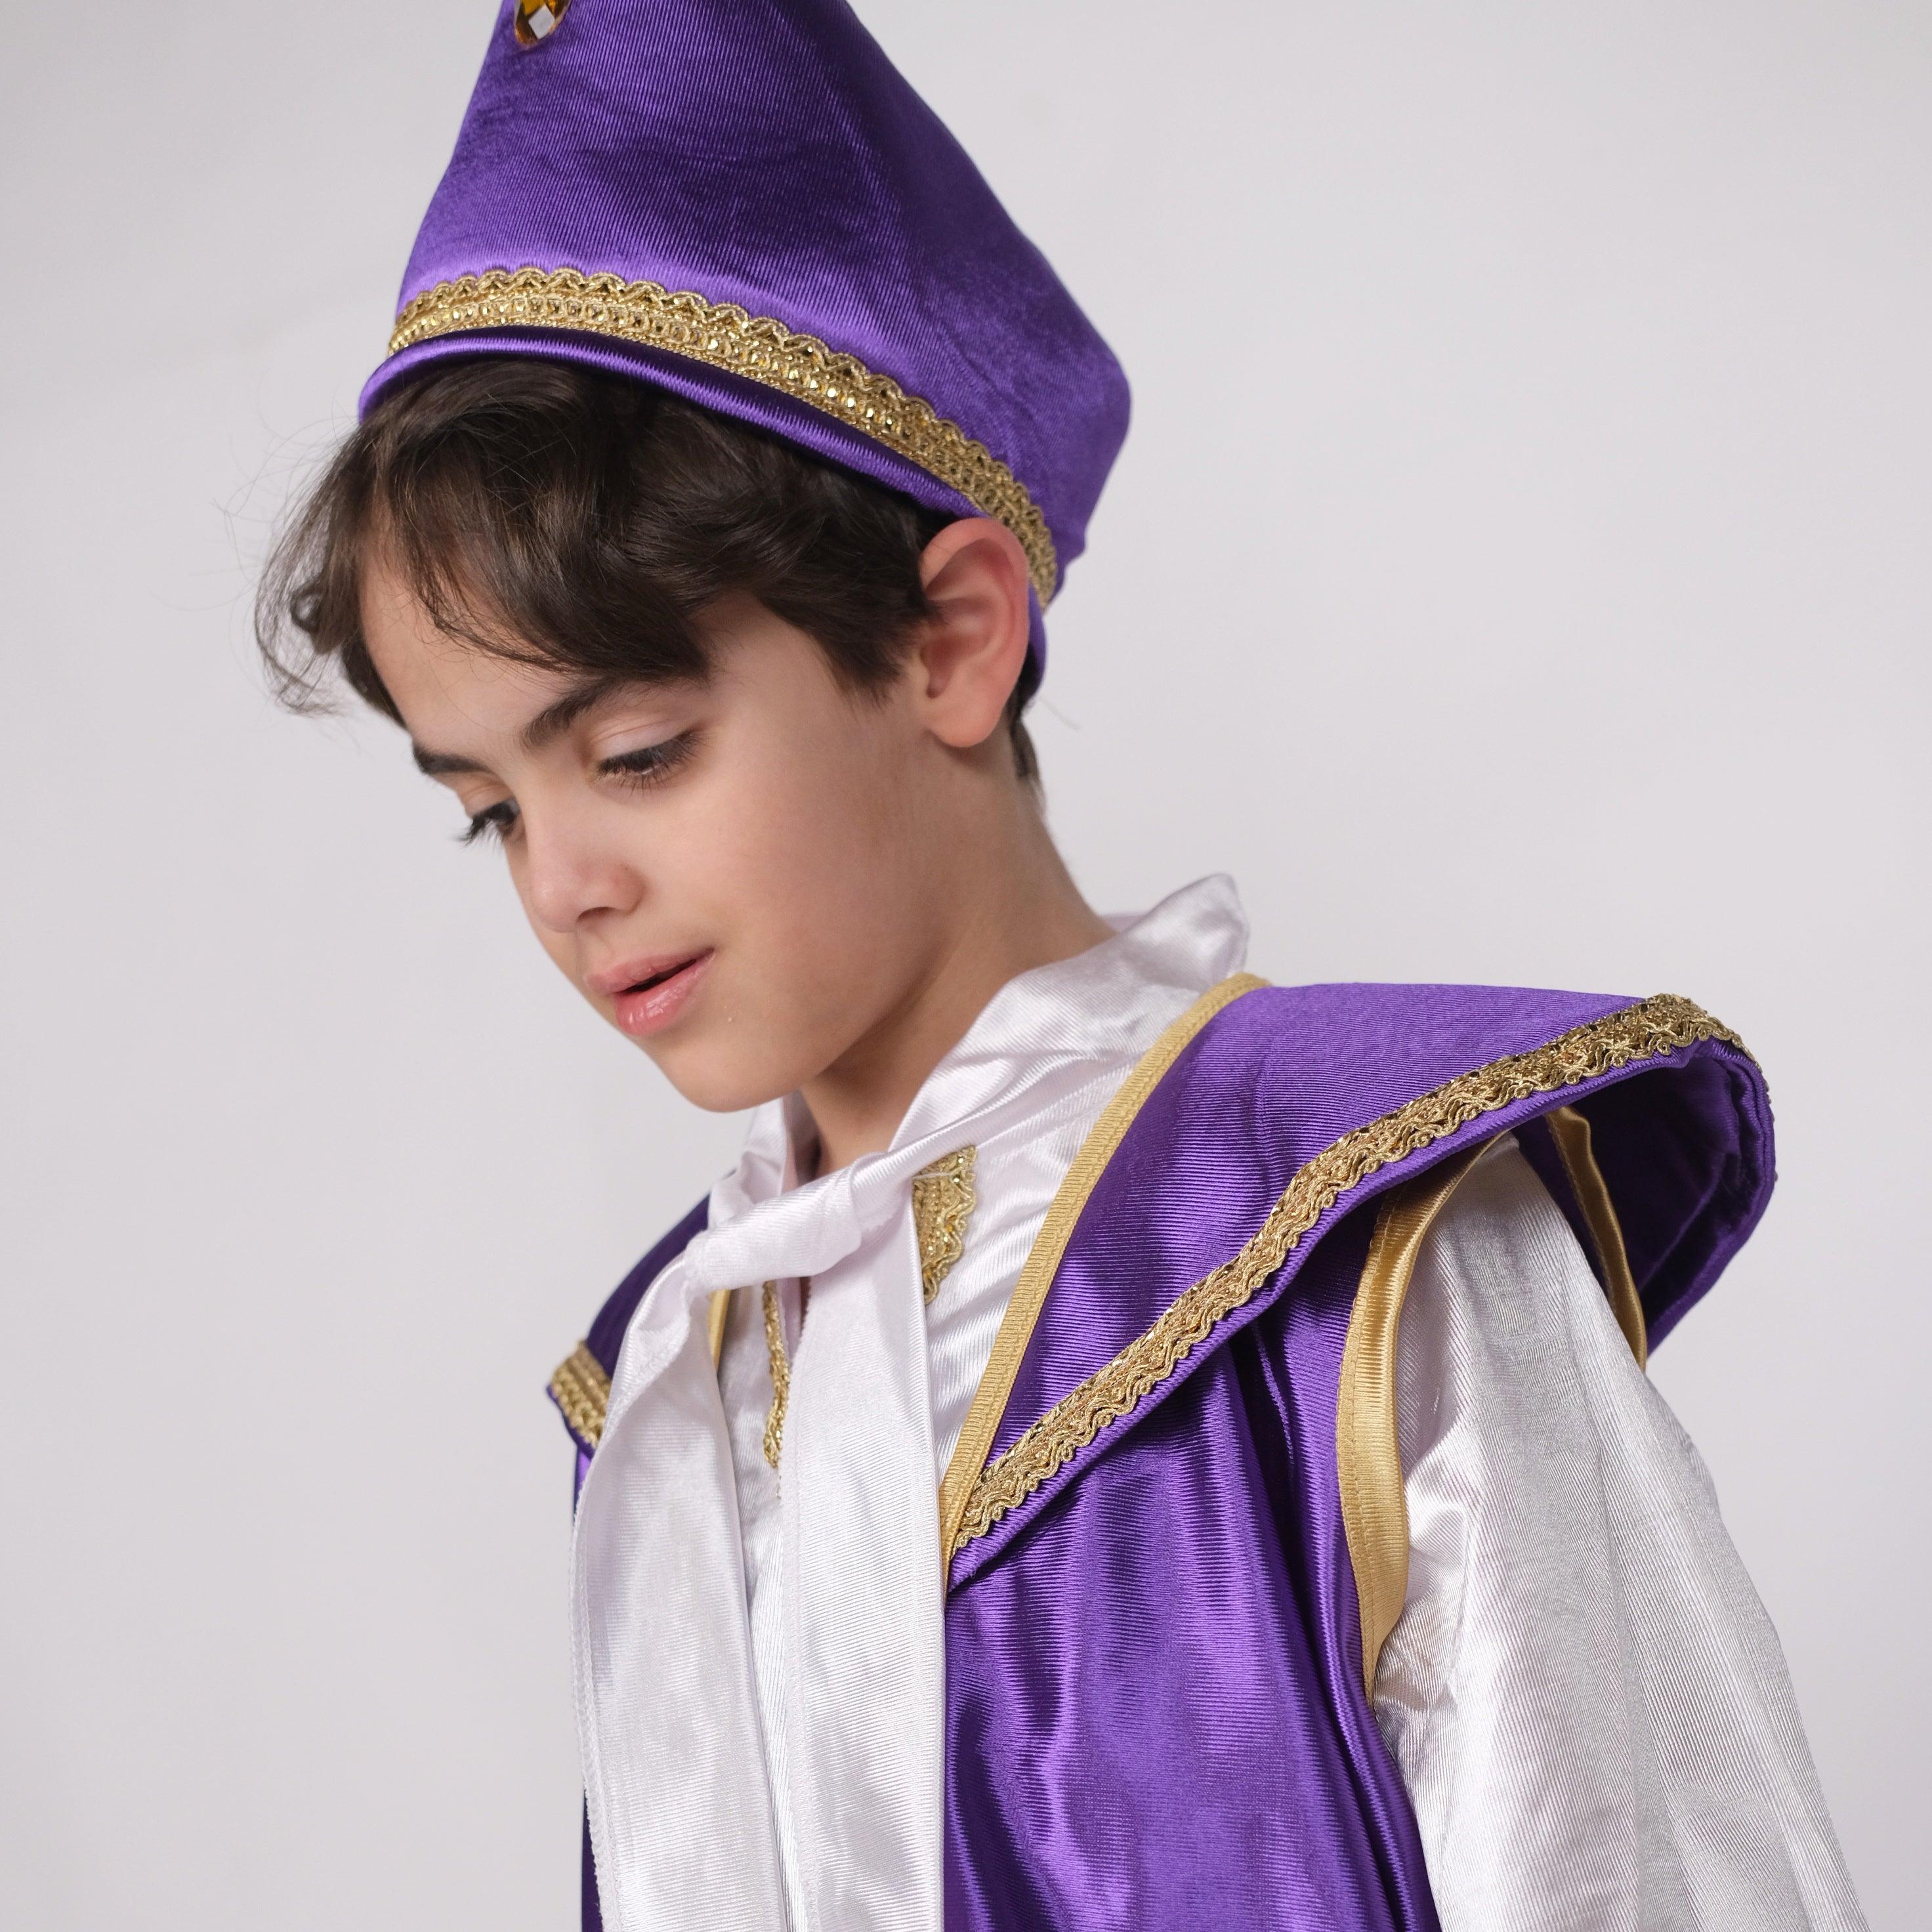 Aladdin Costume - Ourkids - The Party Animals